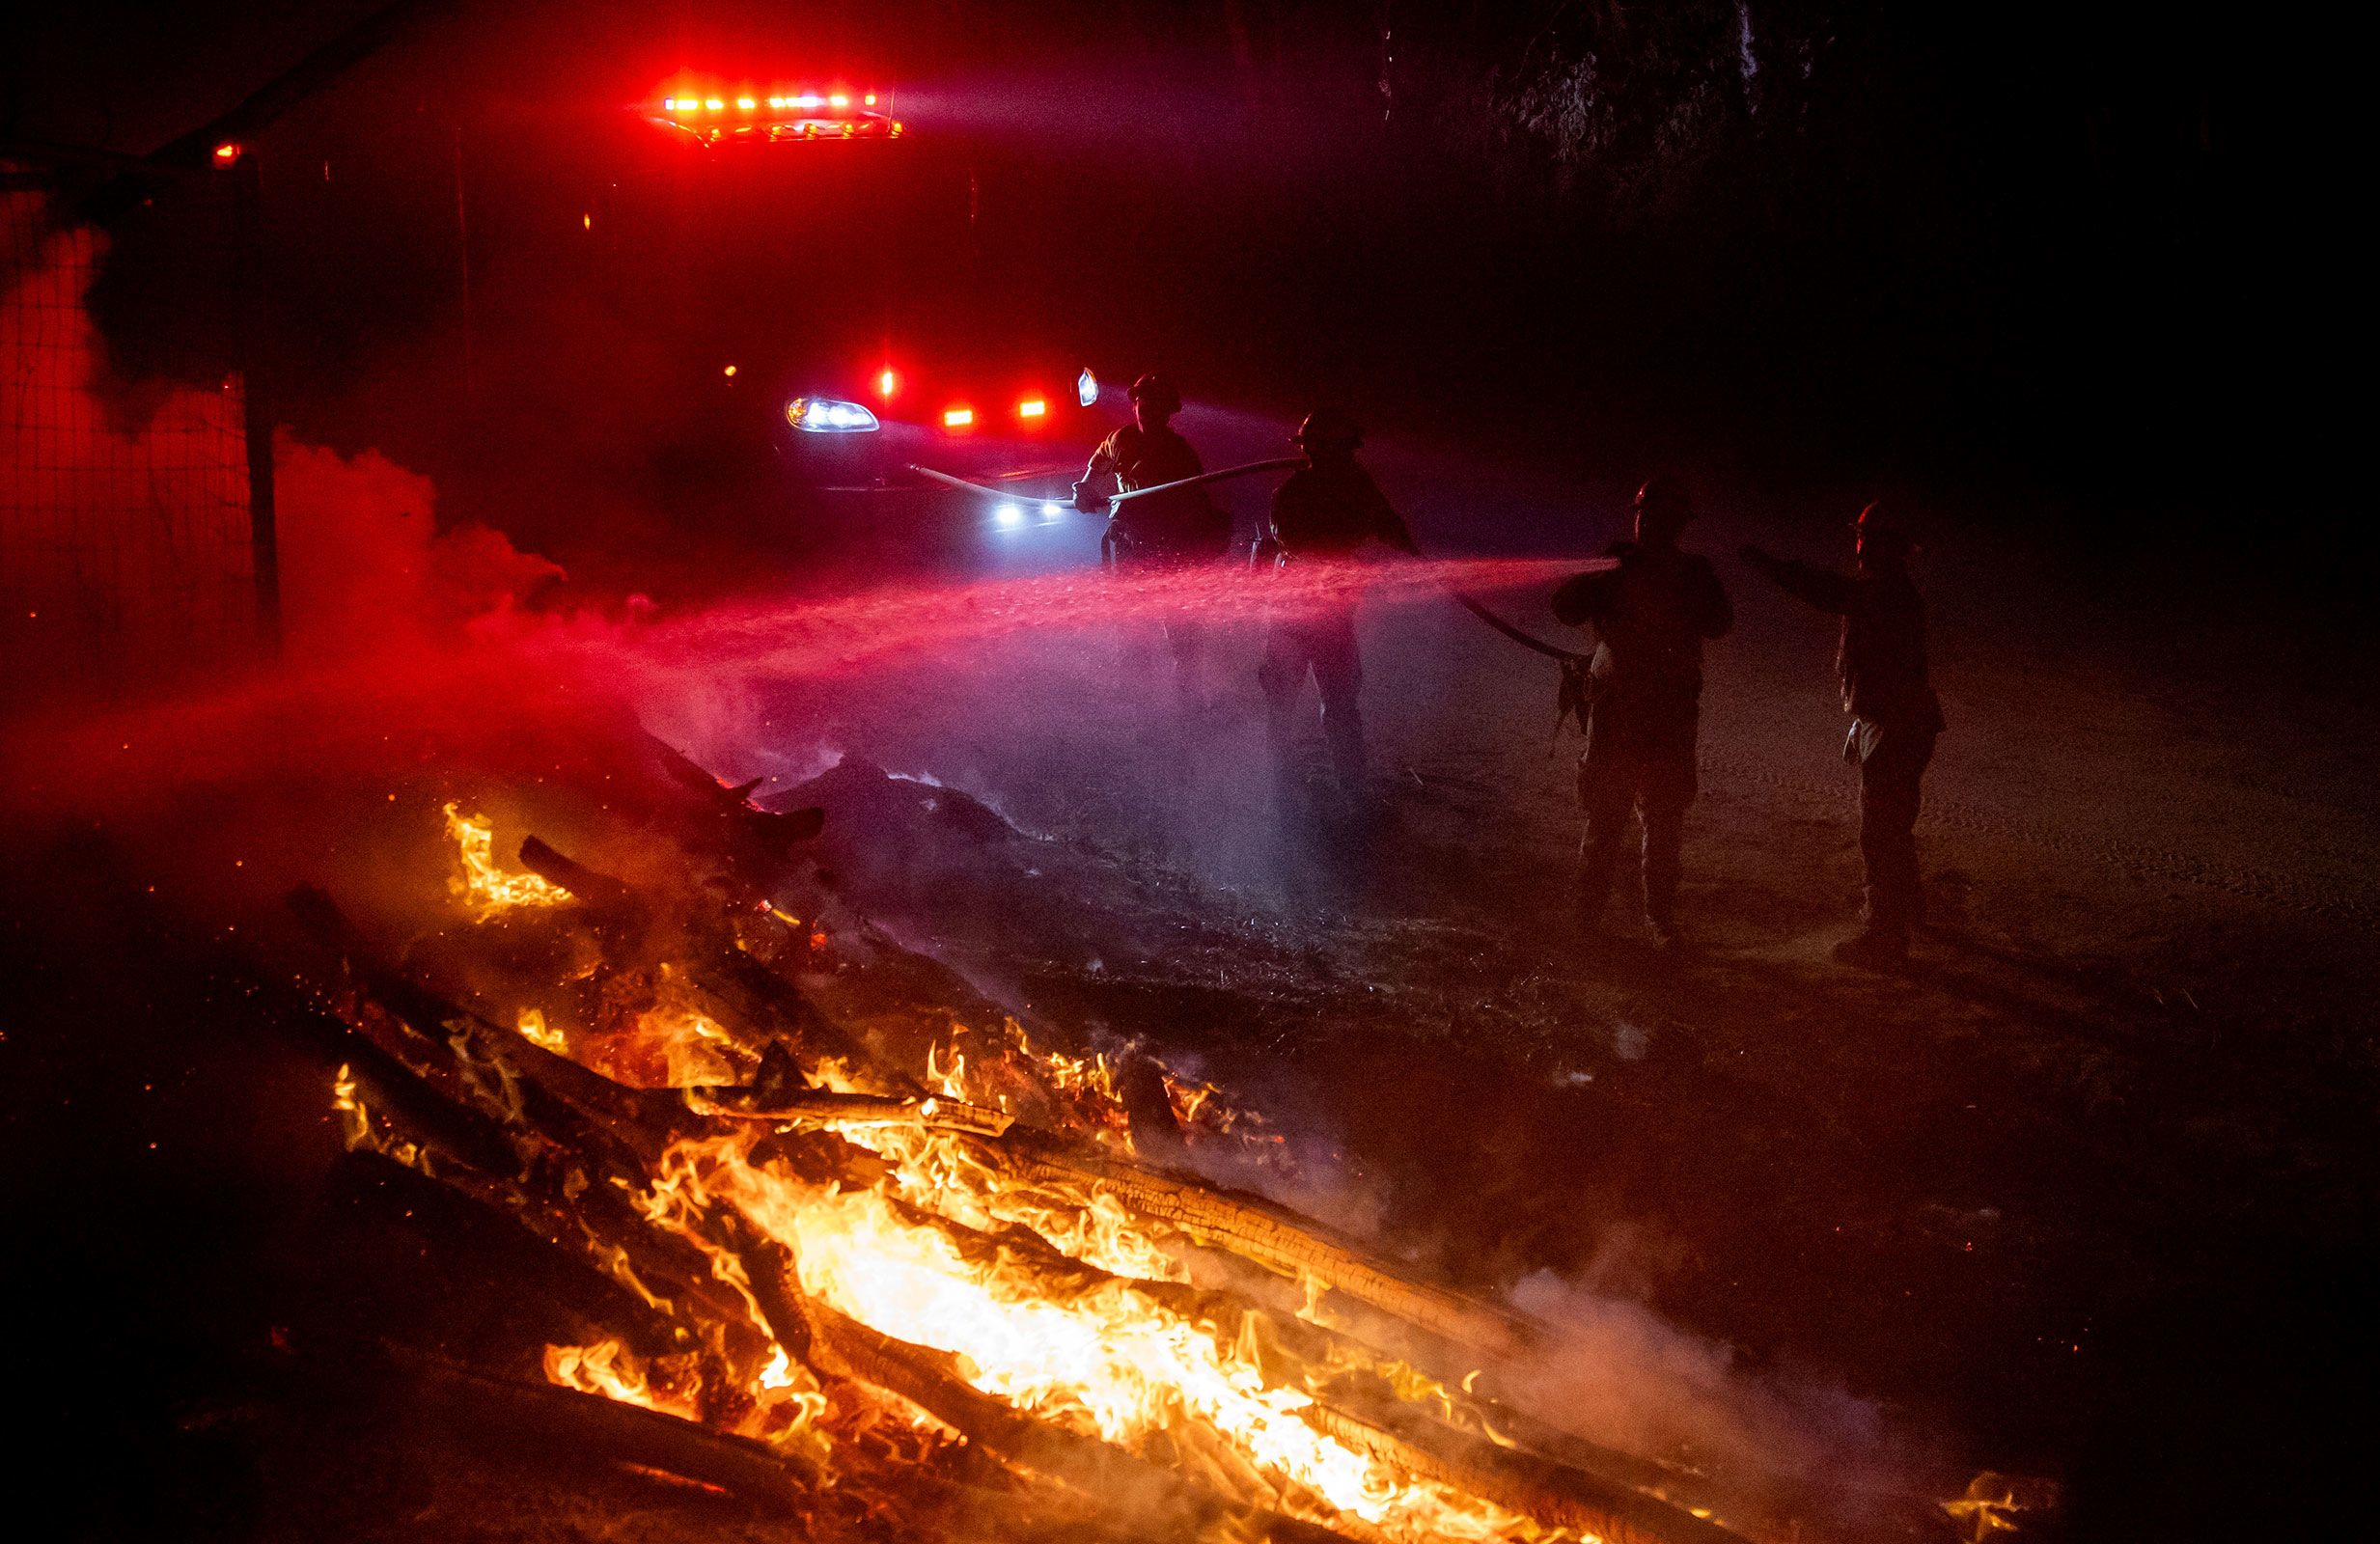 Firefighters douse flames while battling a wildfire called the Highland Fire in Aguanga, California, on Monday, October 30.